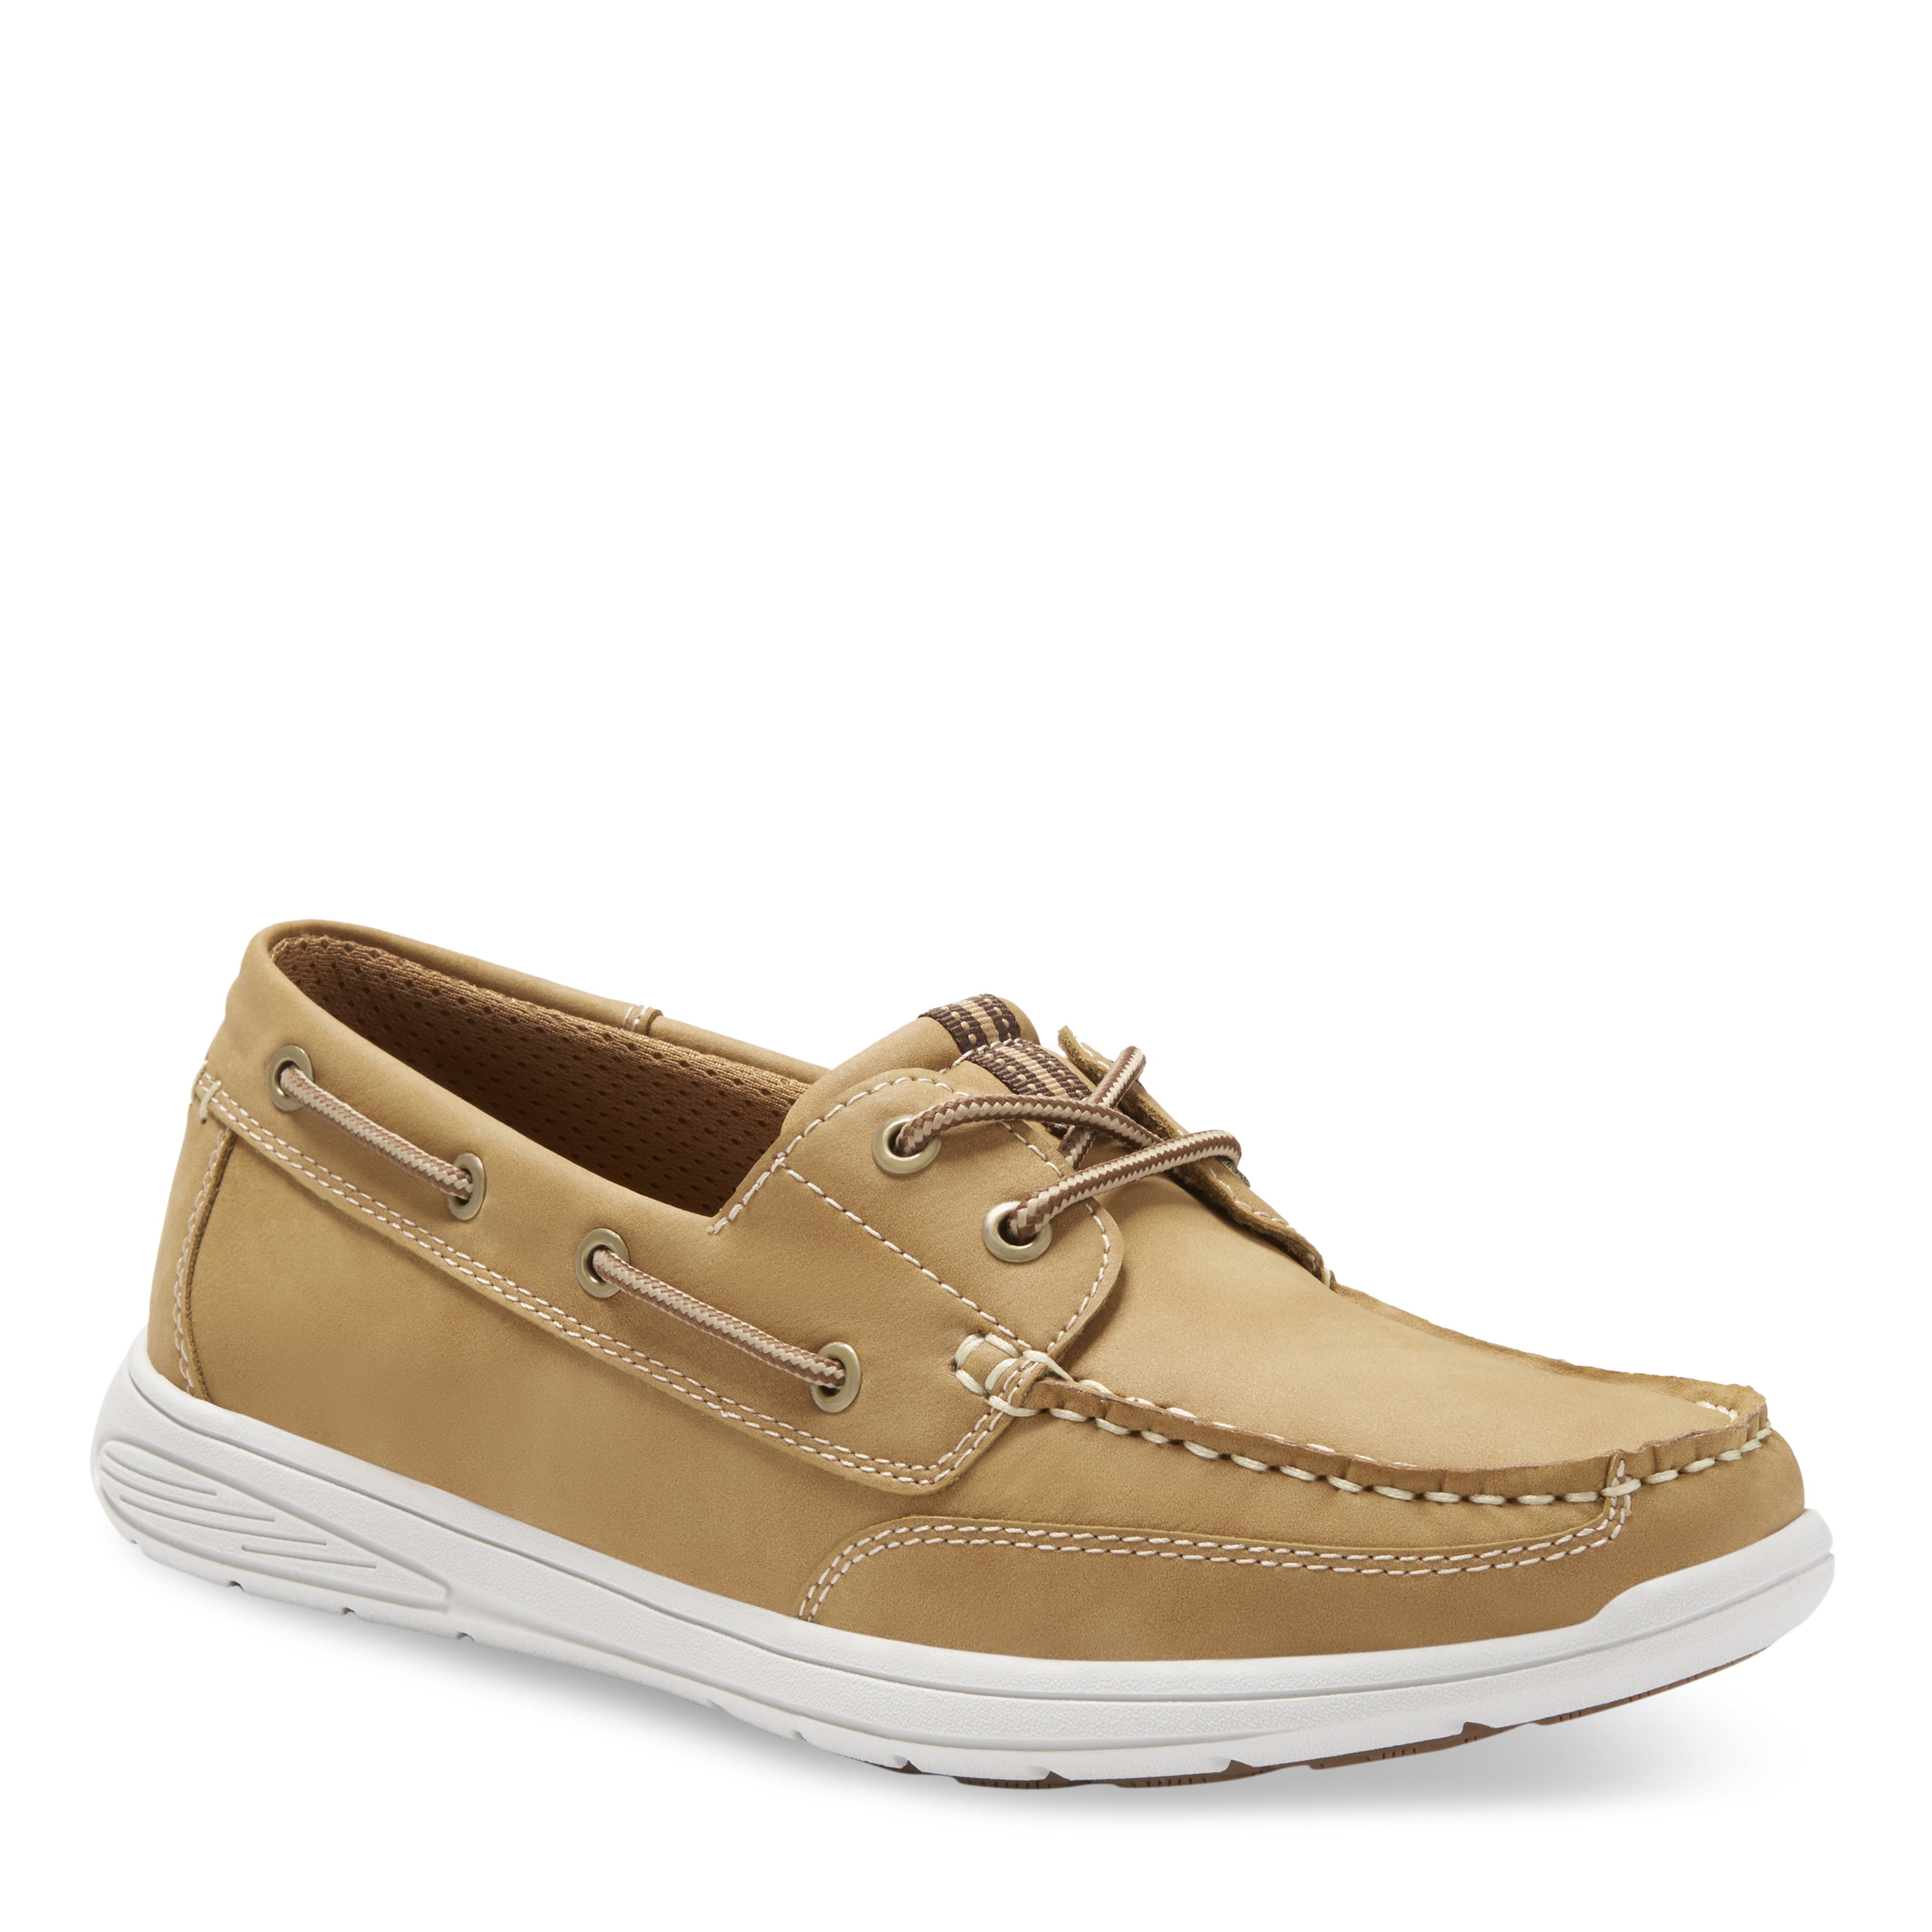 Abrams Slip-on Boat Shoes 